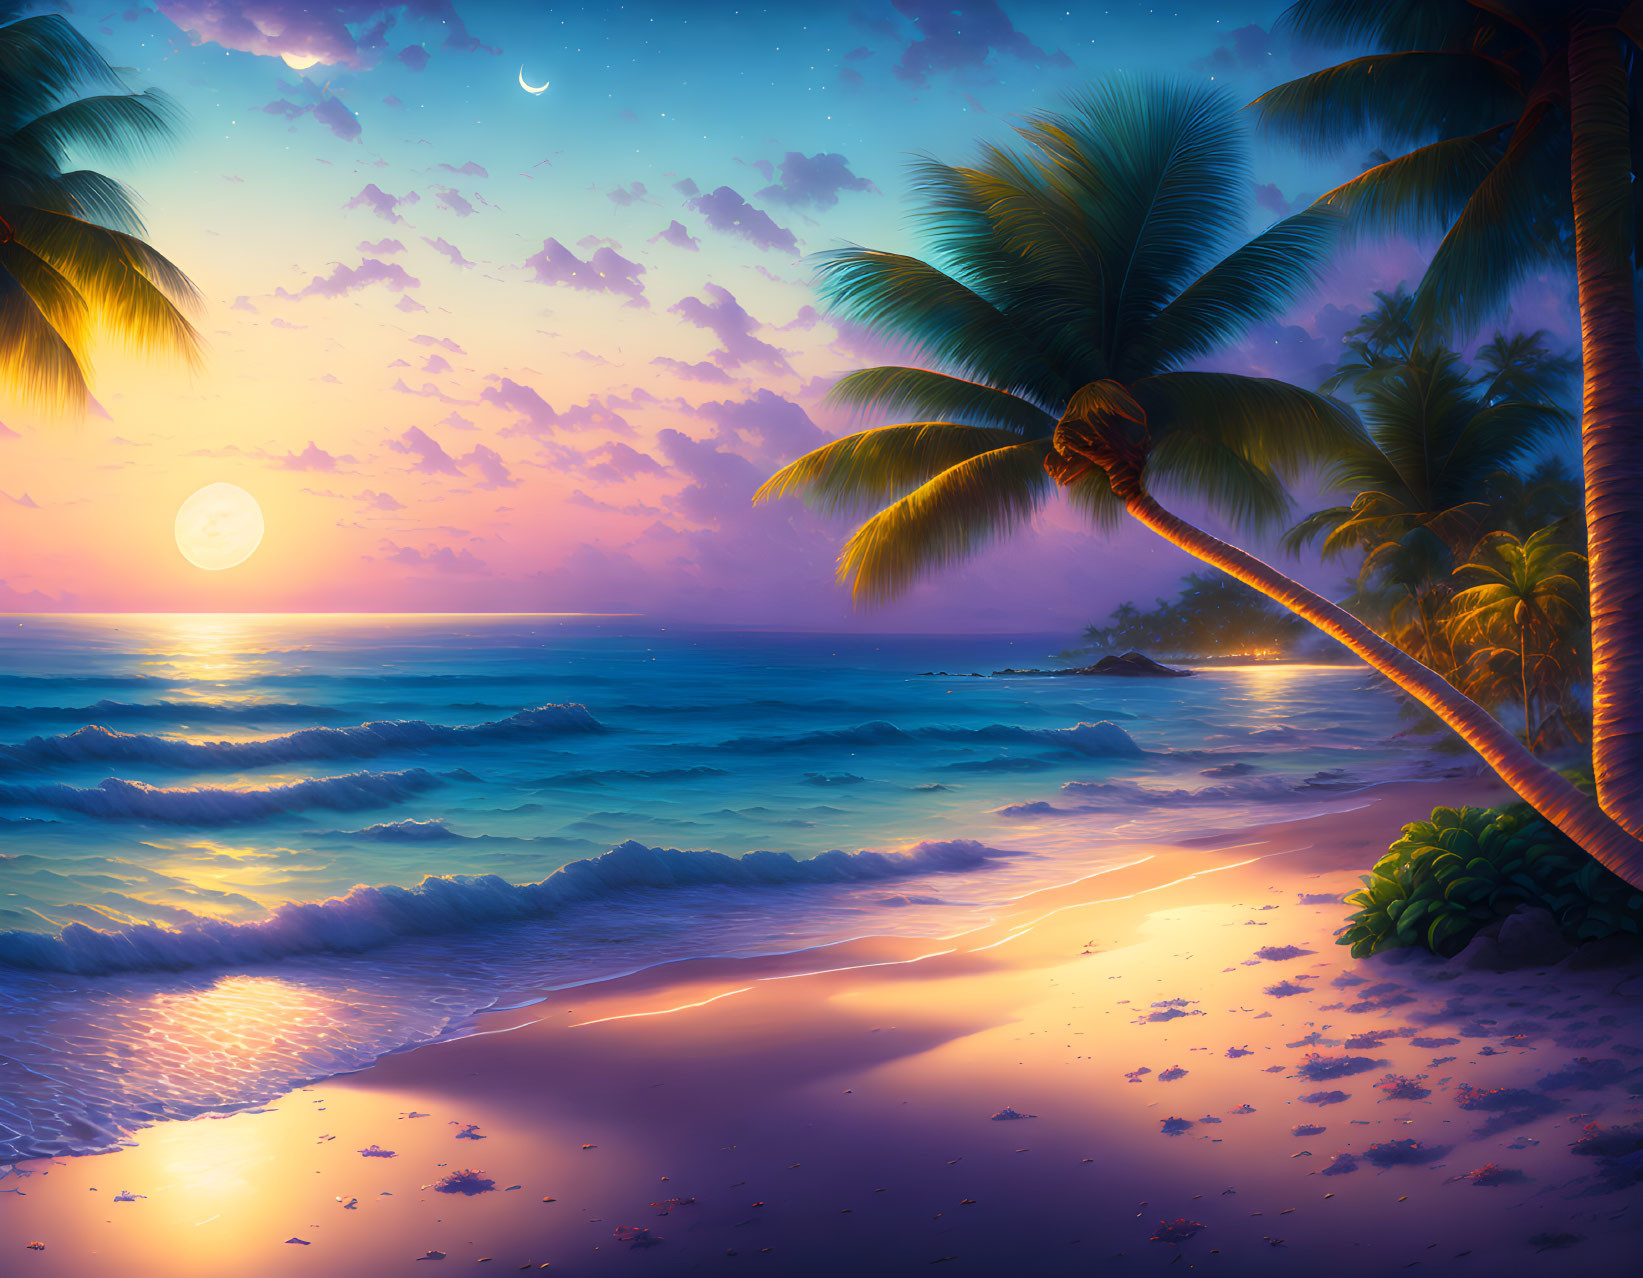 Tranquil Beach Sunset with Crescent Moon and Palm Tree